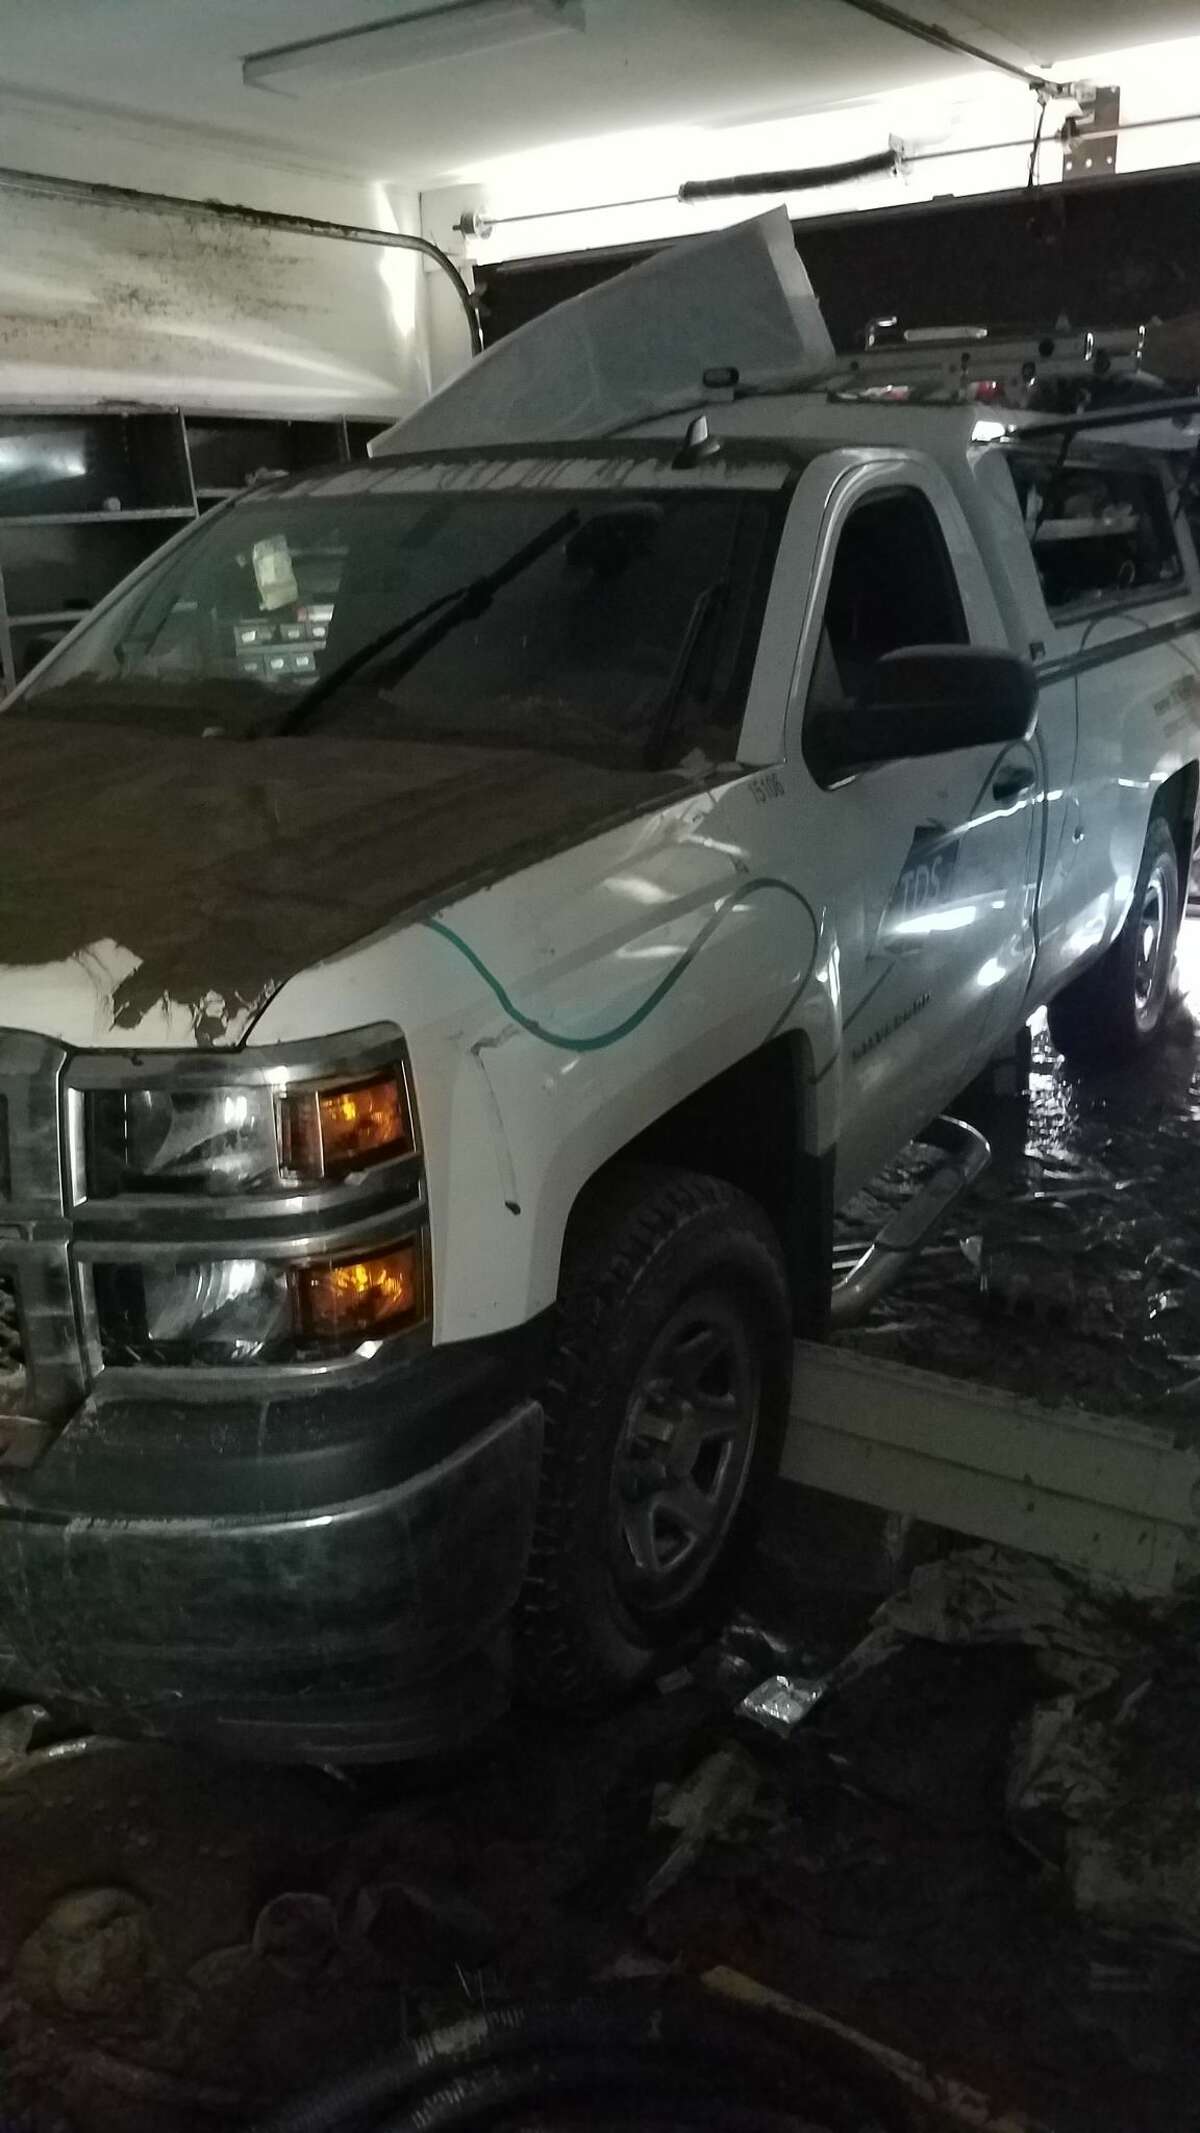 TDS Telecom teams have worked daily to create a new hub for equipment to restore phone and internet service to Sanford area residents after a heavy rain event wiped out the company's central office. Pictured is a company truck that was in a pole barn during the flood. (Photo provided/TDS Telecom)